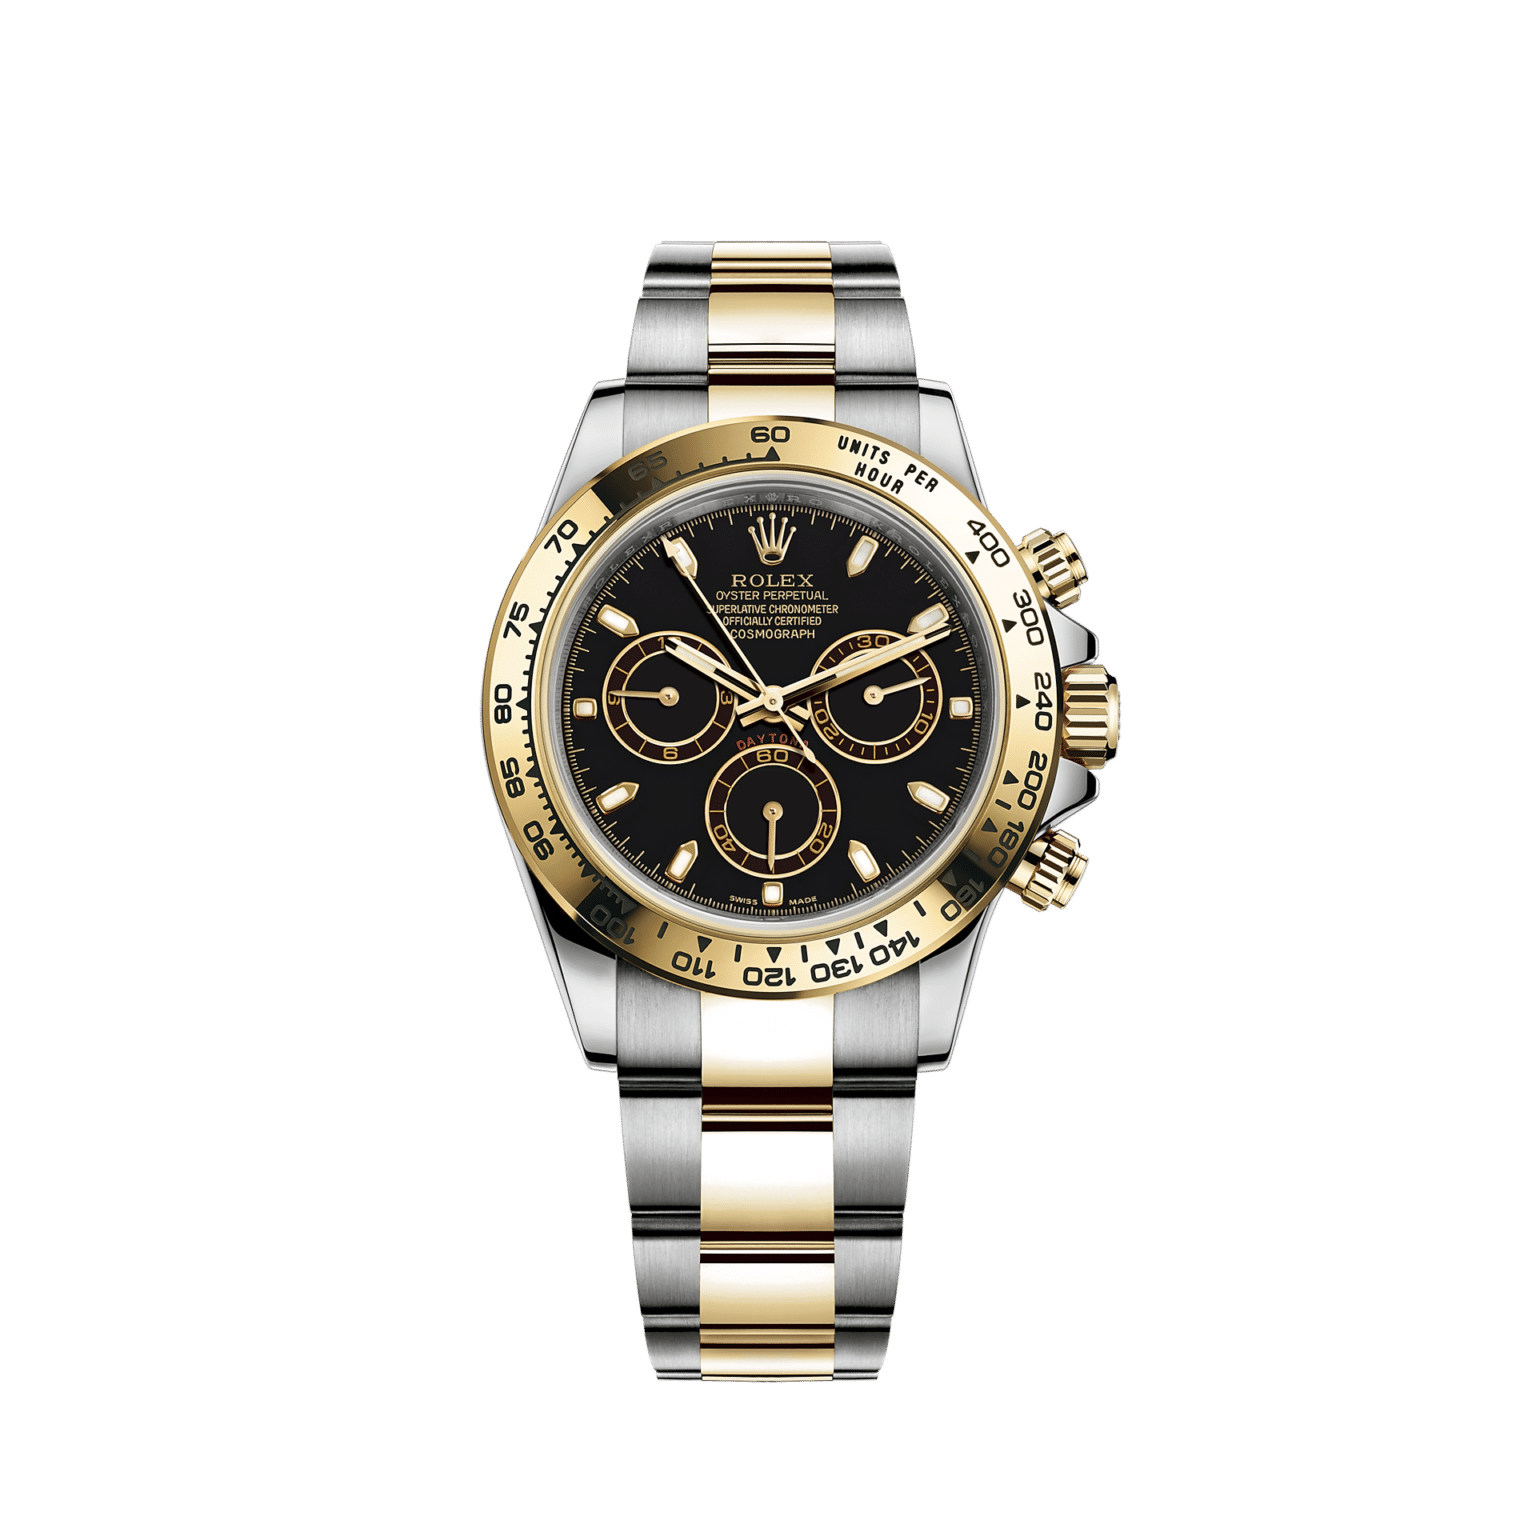 Rolex increases prices in 2022